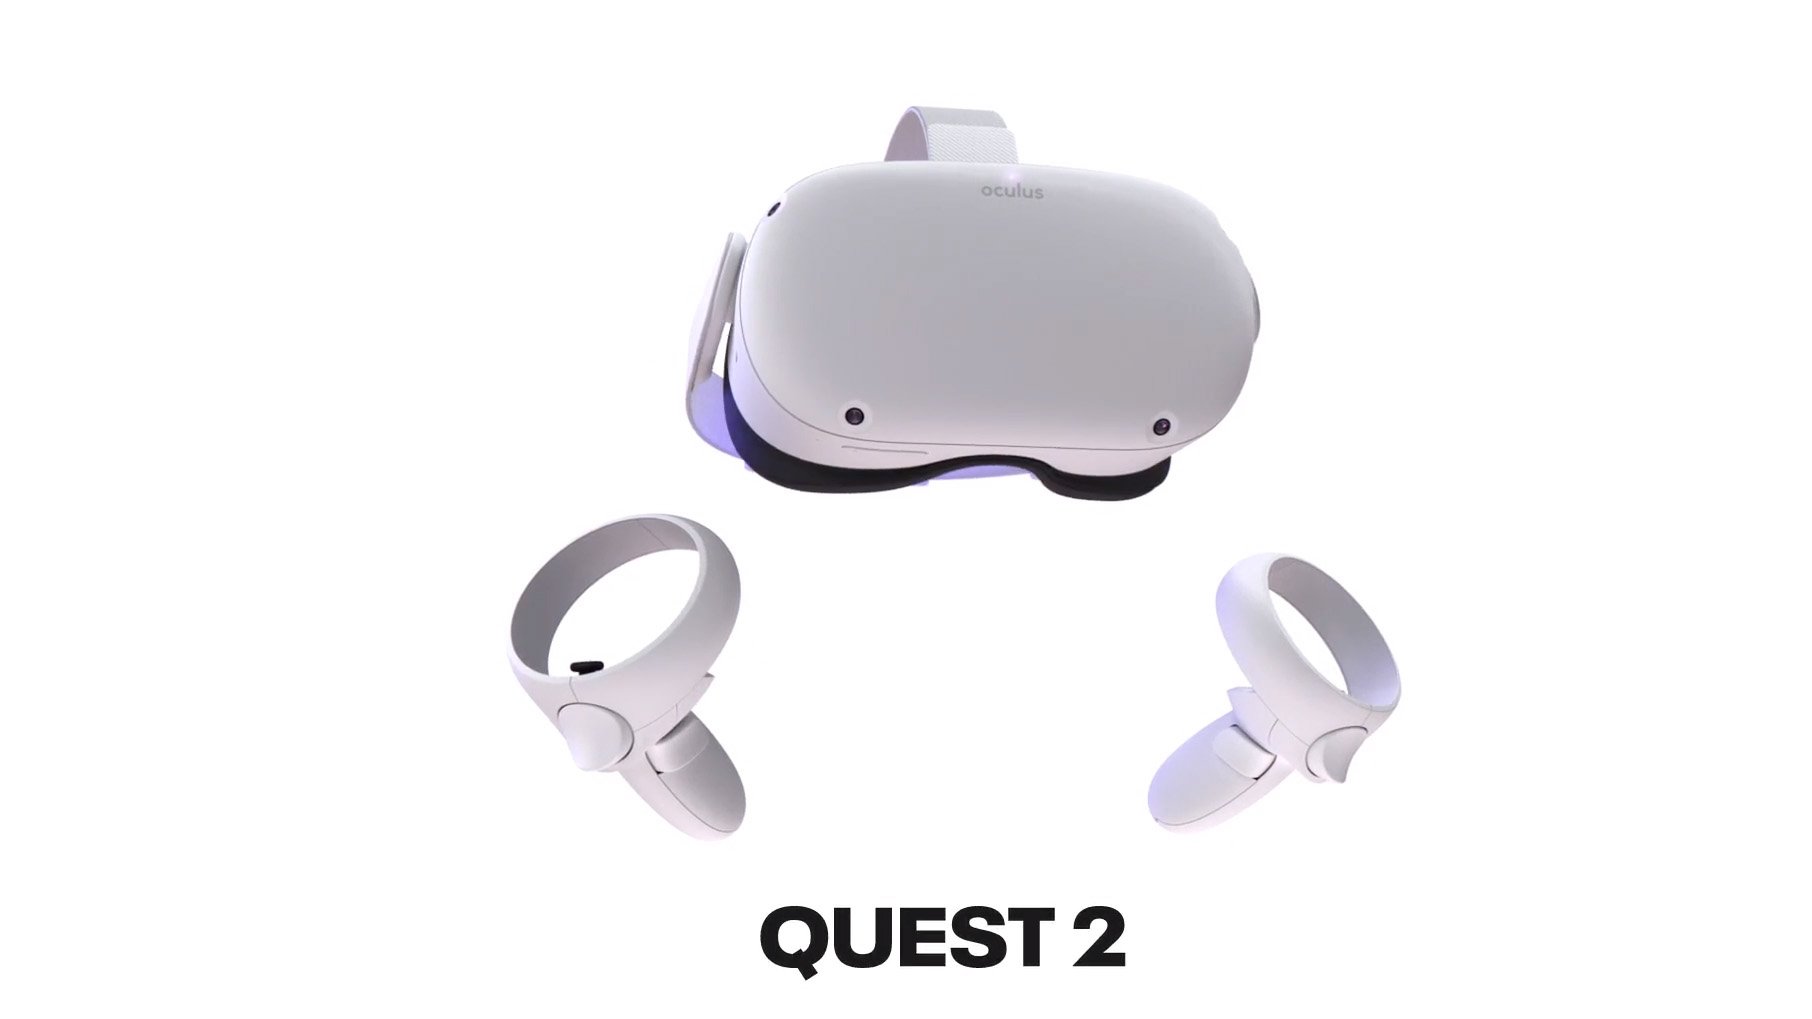 How to preorder Oculus Quest 2 | Windows Central